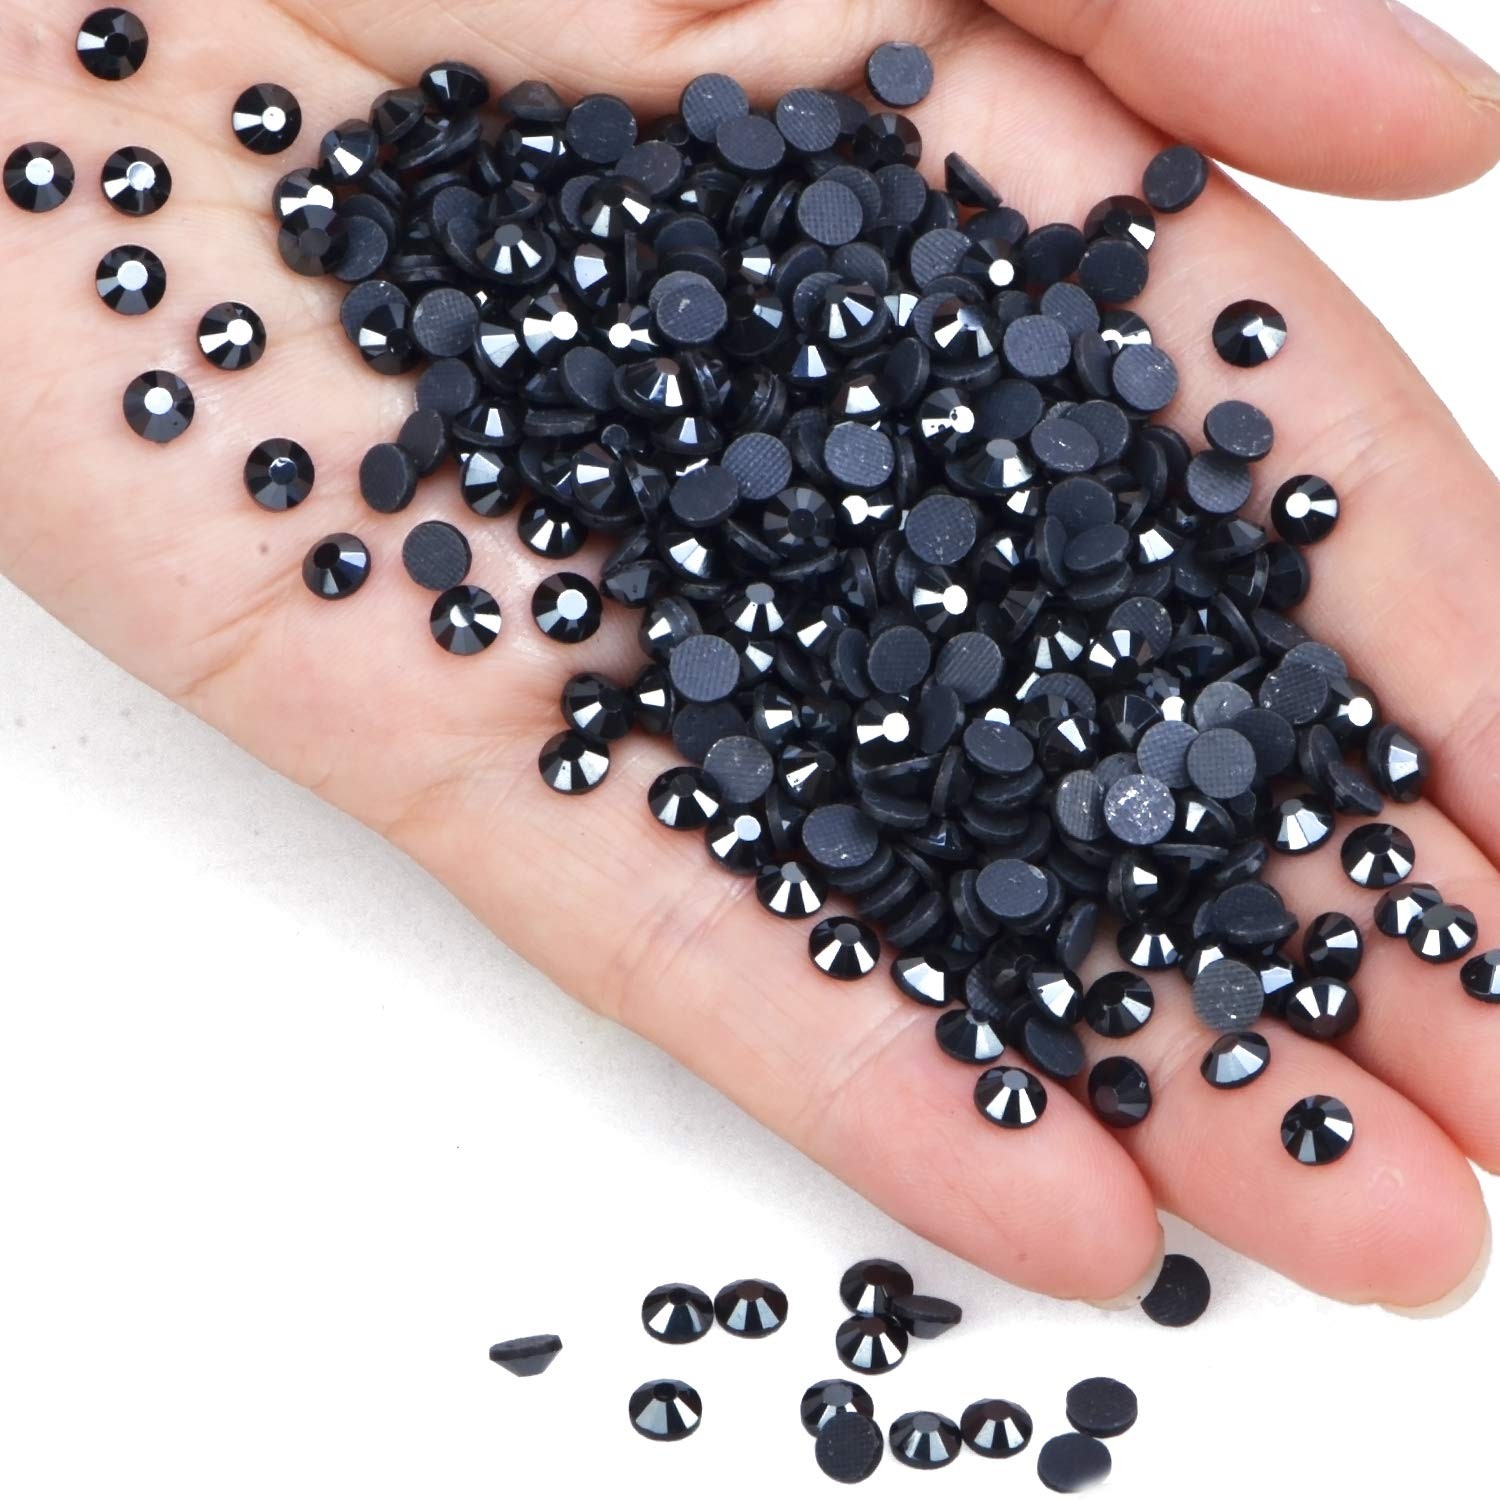 5mm Round Shape Stone Crystal Kundans Beads Stone for Art & Craft, Jewellery Making, Bangles, Embroidery & DIY Works (Black)(10000 Pieces)